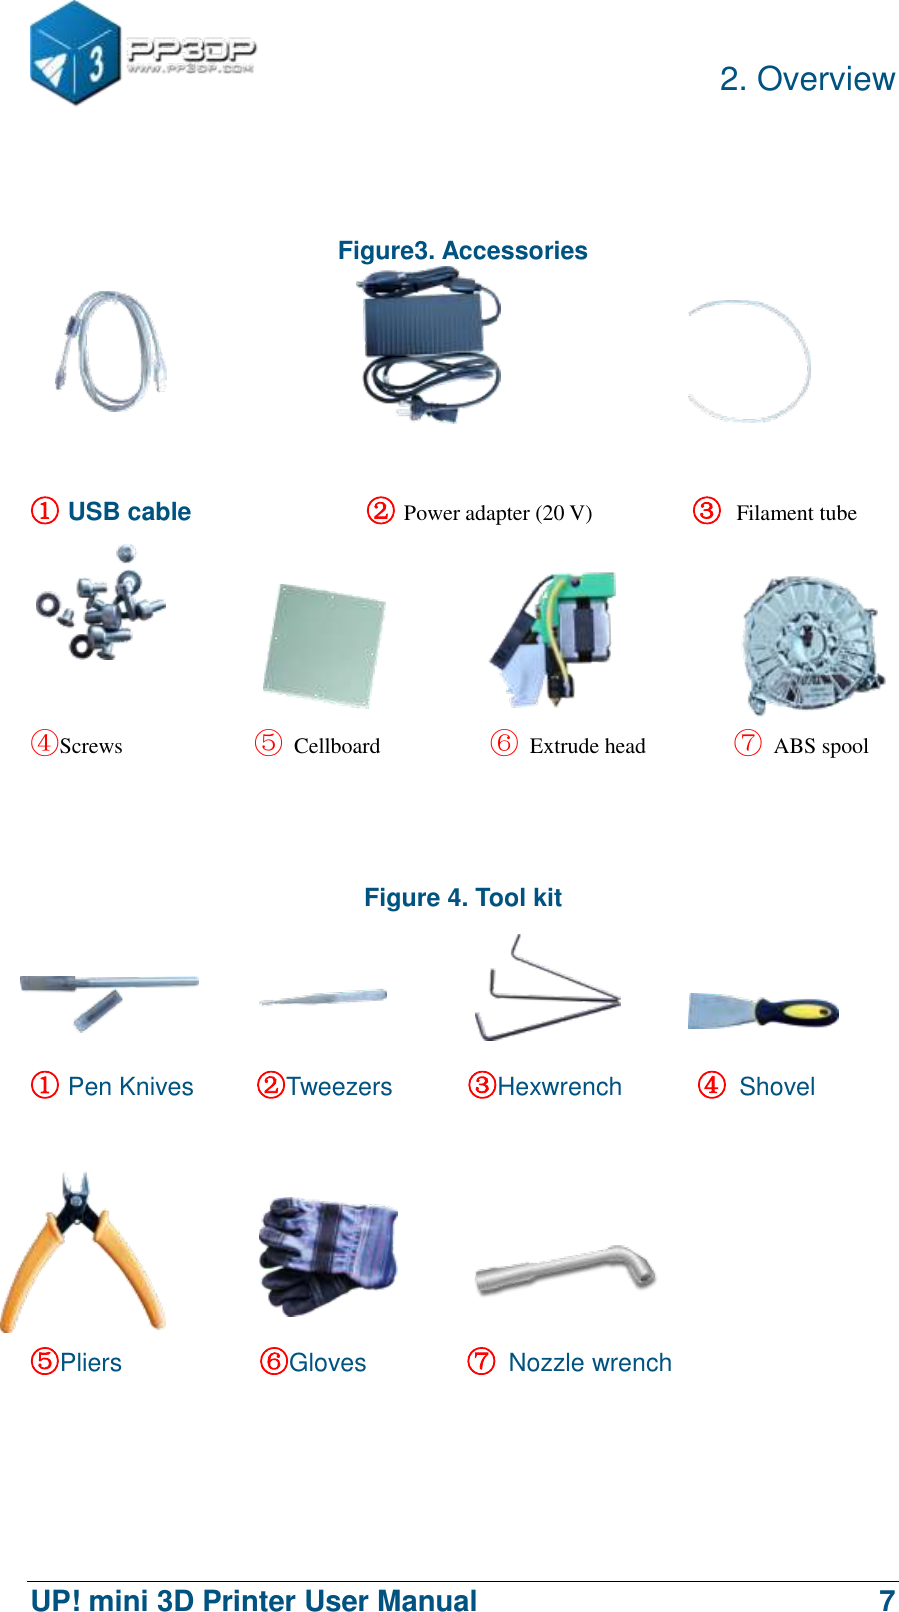          2. Overview  UP! mini 3D Printer User Manual                                7   Figure3. Accessories       ① USB cable                    ② Power adapter (20 V)        ③ Filament tube   ④Screws                   ⑤  Cellboard                  ⑥  Extrude head                ⑦  ABS spool   Figure 4. Tool kit   ① Pen Knives     ②Tweezers      ③Hexwrench      ④  Shovel     ⑤Pliers           ⑥Gloves        ⑦  Nozzle wrench      